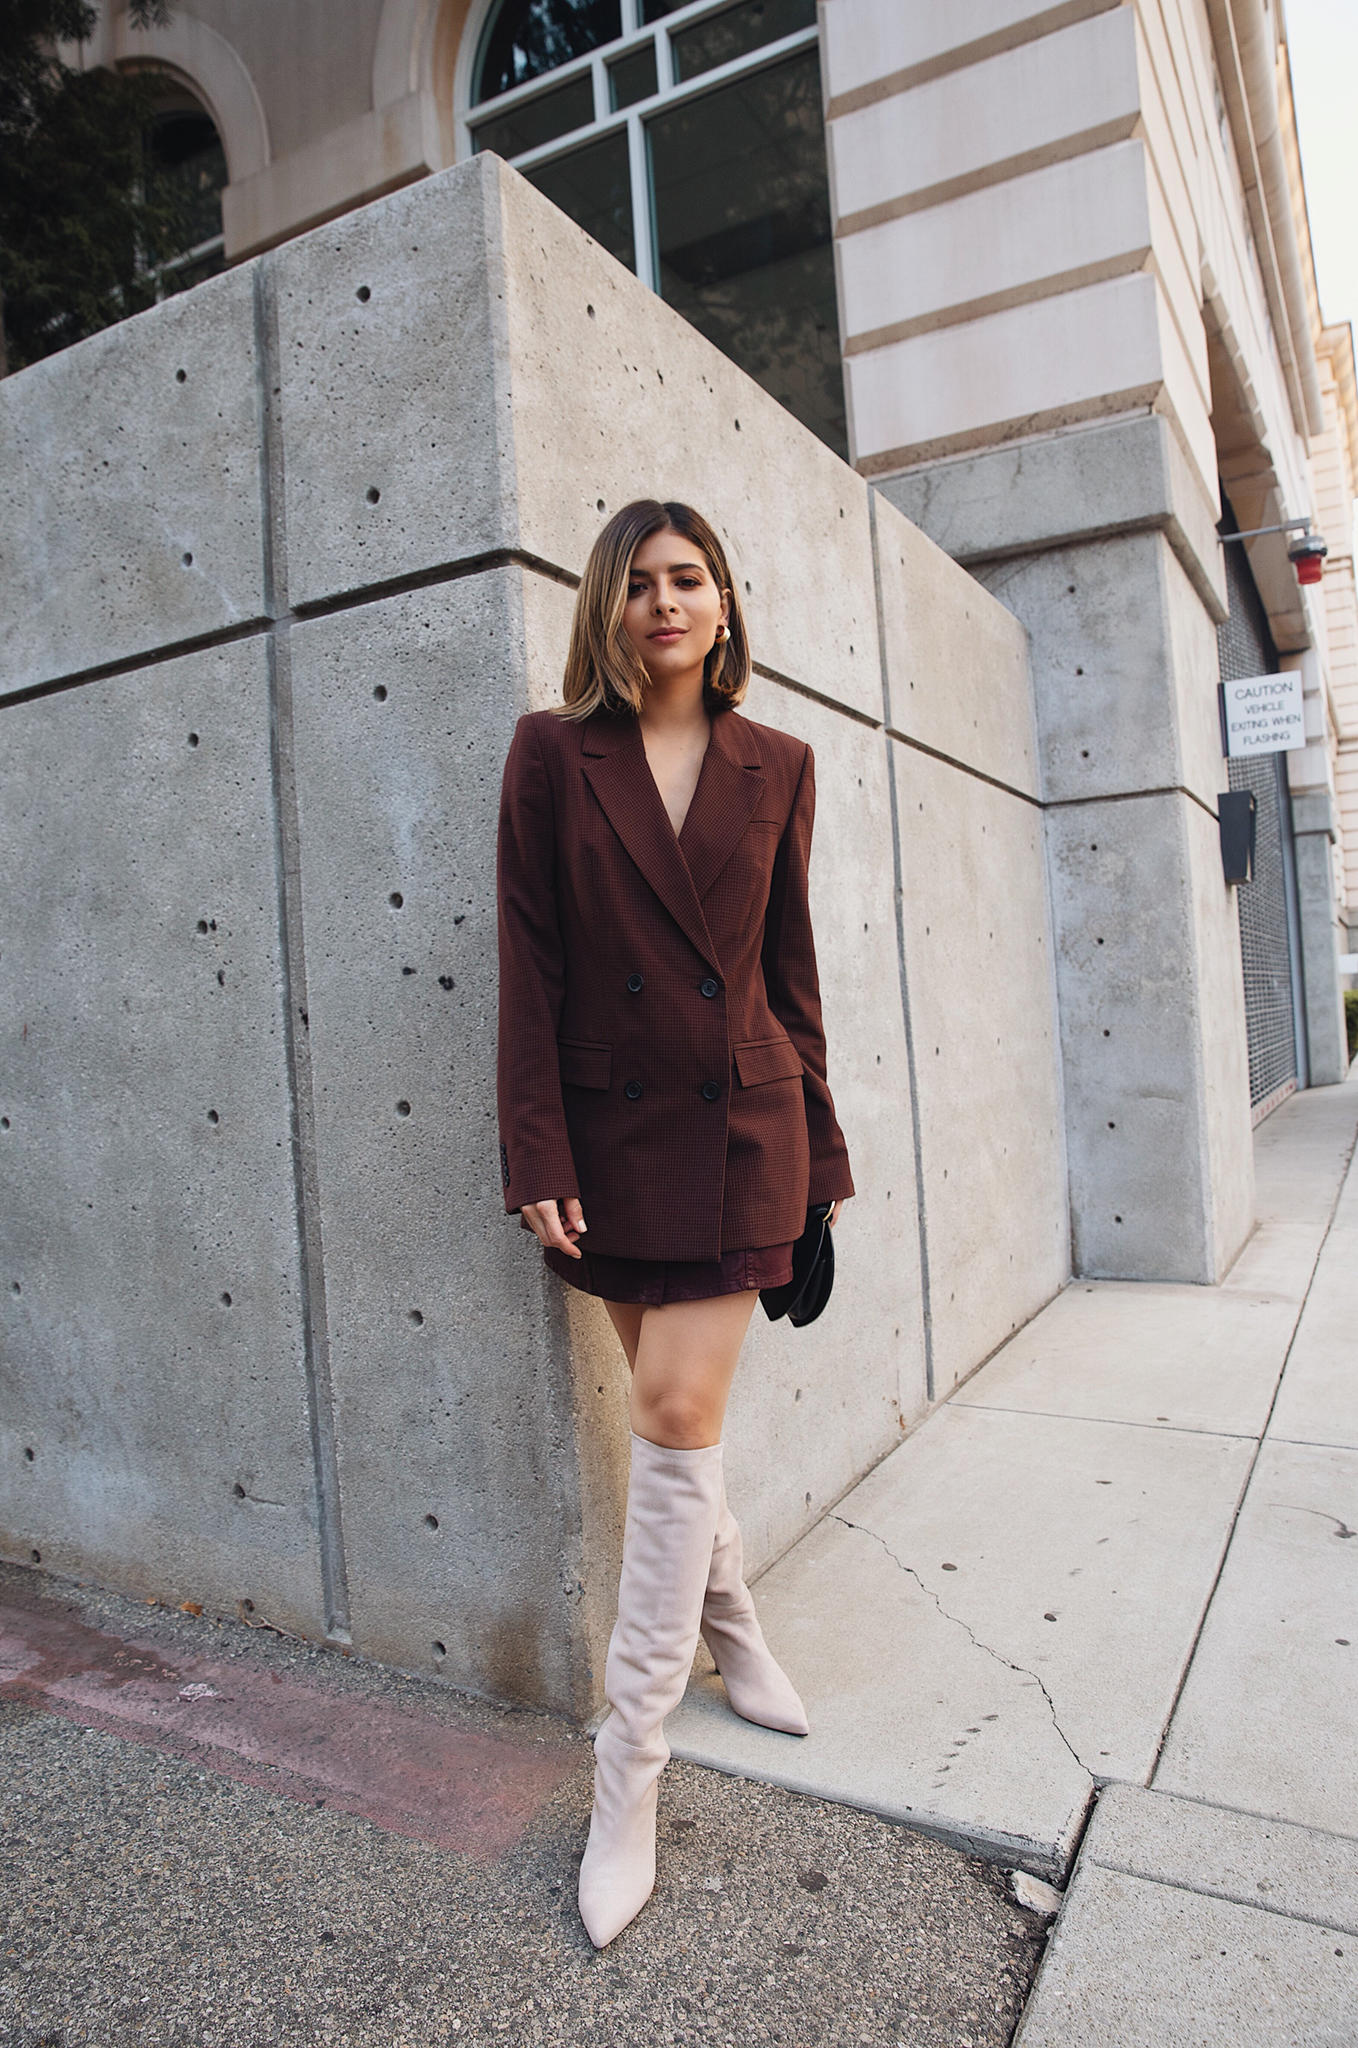 Pre-Black Friday Sales Happening Now by Pam Hetlinger | TheGirlFromPanama.com | Aritzia Blazer, knee high boots, chic fall outfit, burgundy fall outfit